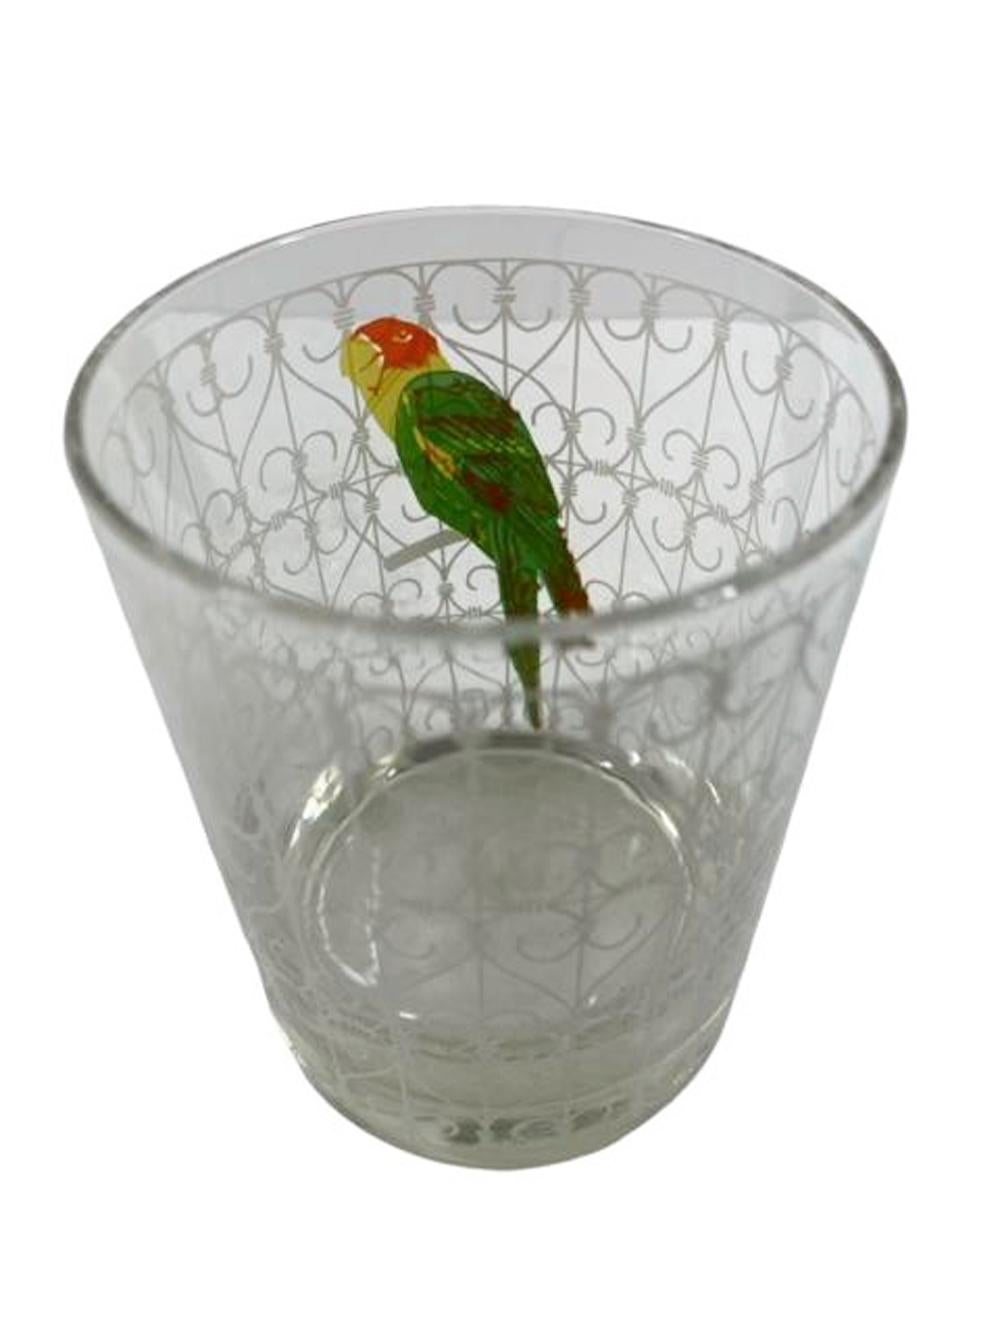 American Six Vintage Rocks Glasses with a Parrot in a White Scrollwork Cage by Cera Glass For Sale